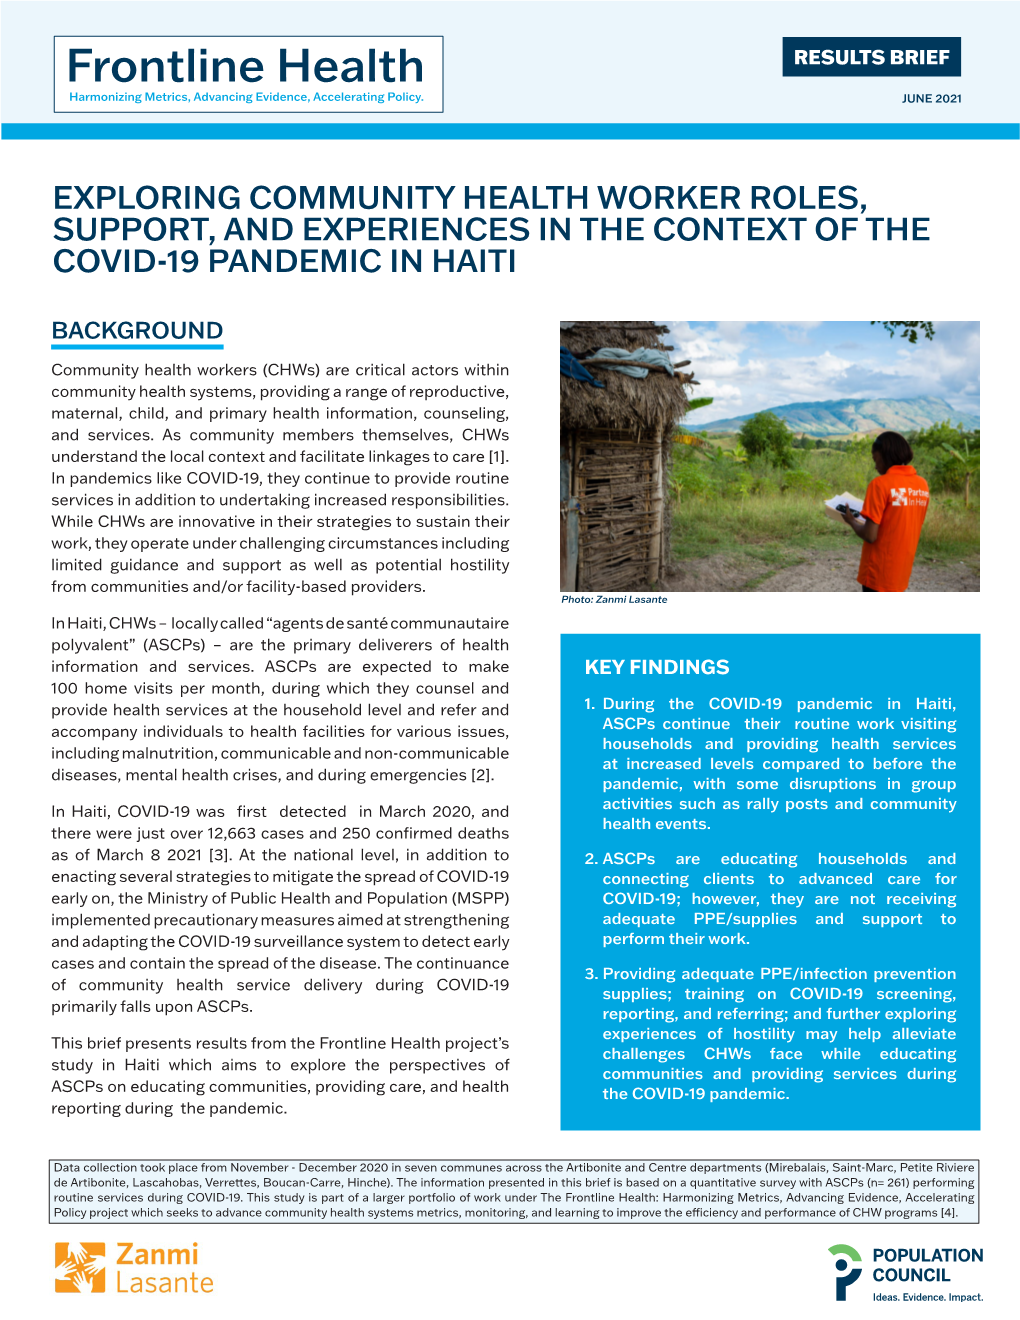 Exploring Community Health Worker Roles, Support, and Experiences in the Context of the Covid-19 Pandemic in Haiti